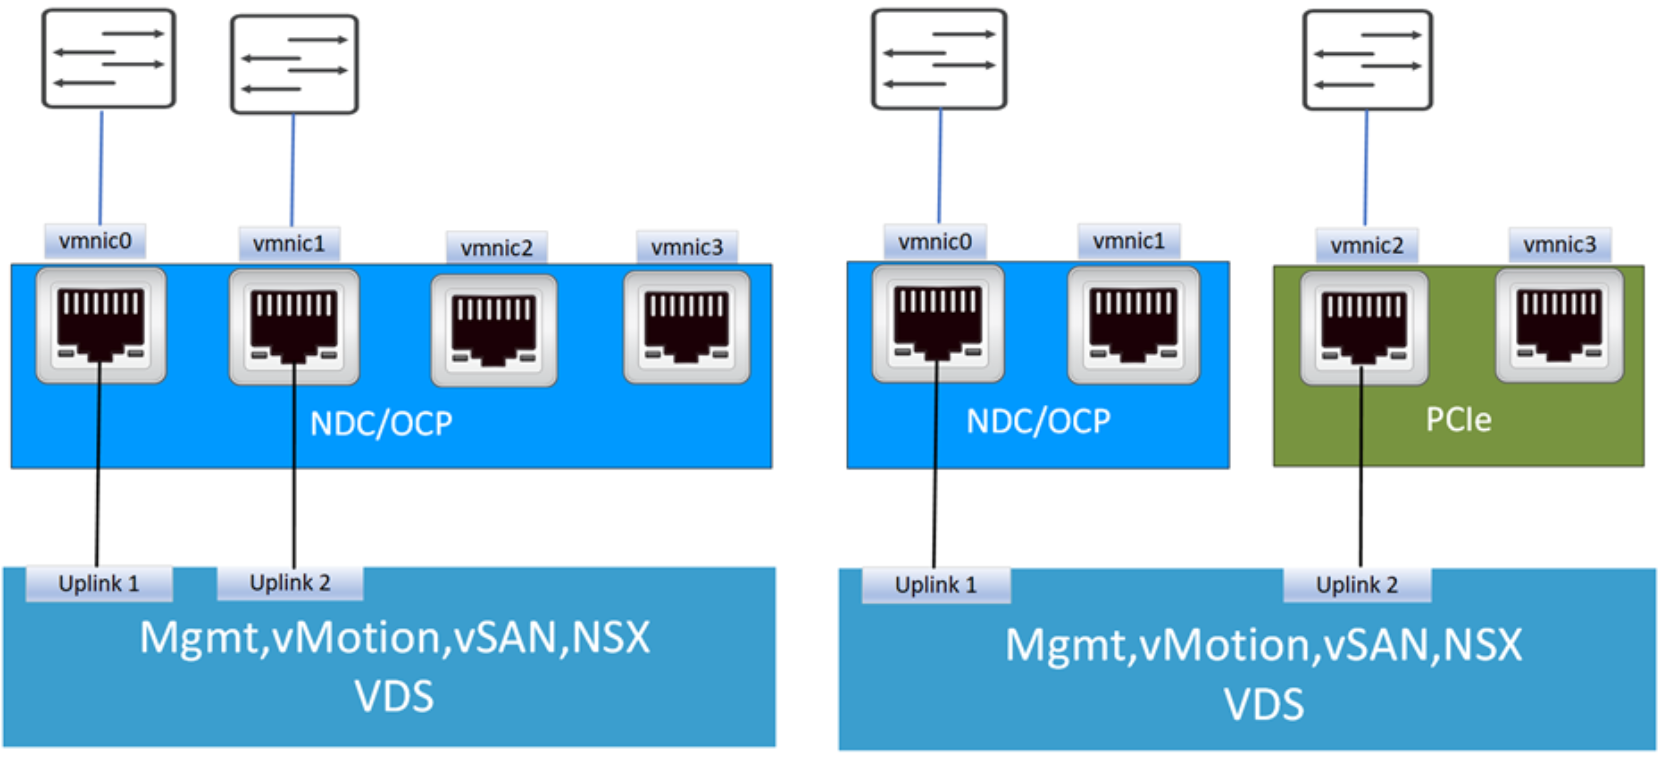 This picture shows connectivity options for VxRail nodes with 2 NICs.